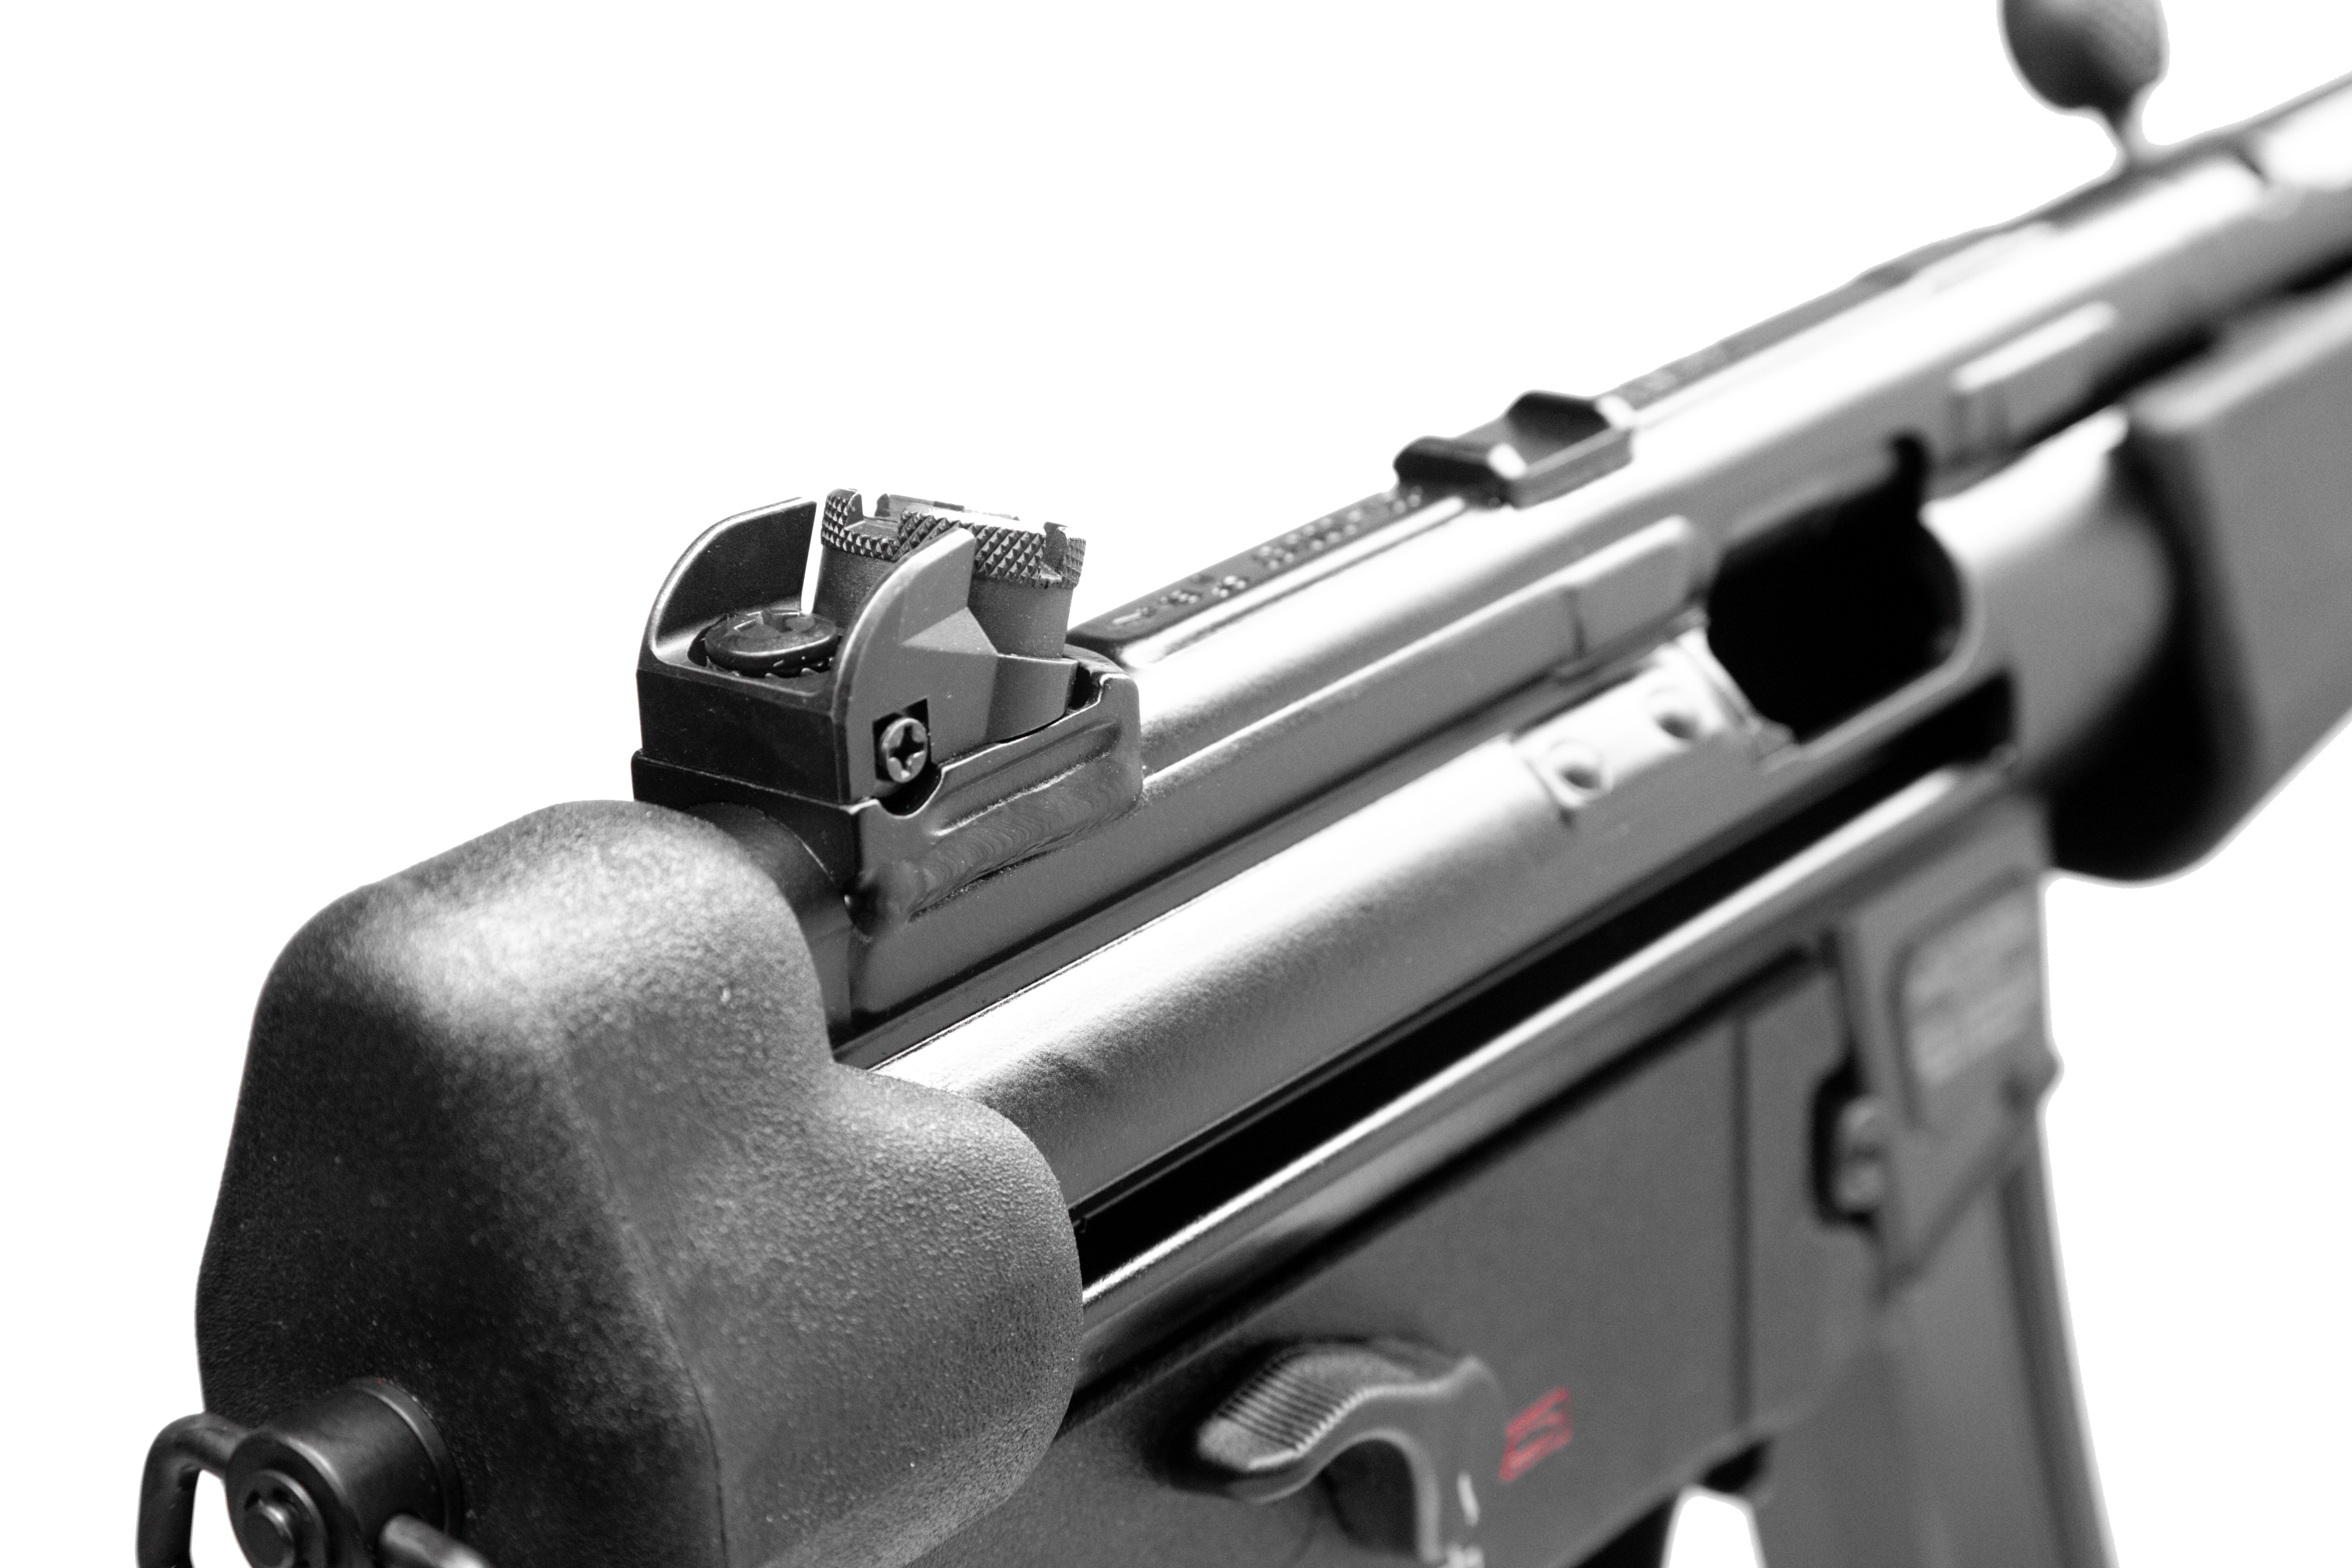 4 position rotary rear sight. The same sighting system is used on the select fire MP5K.